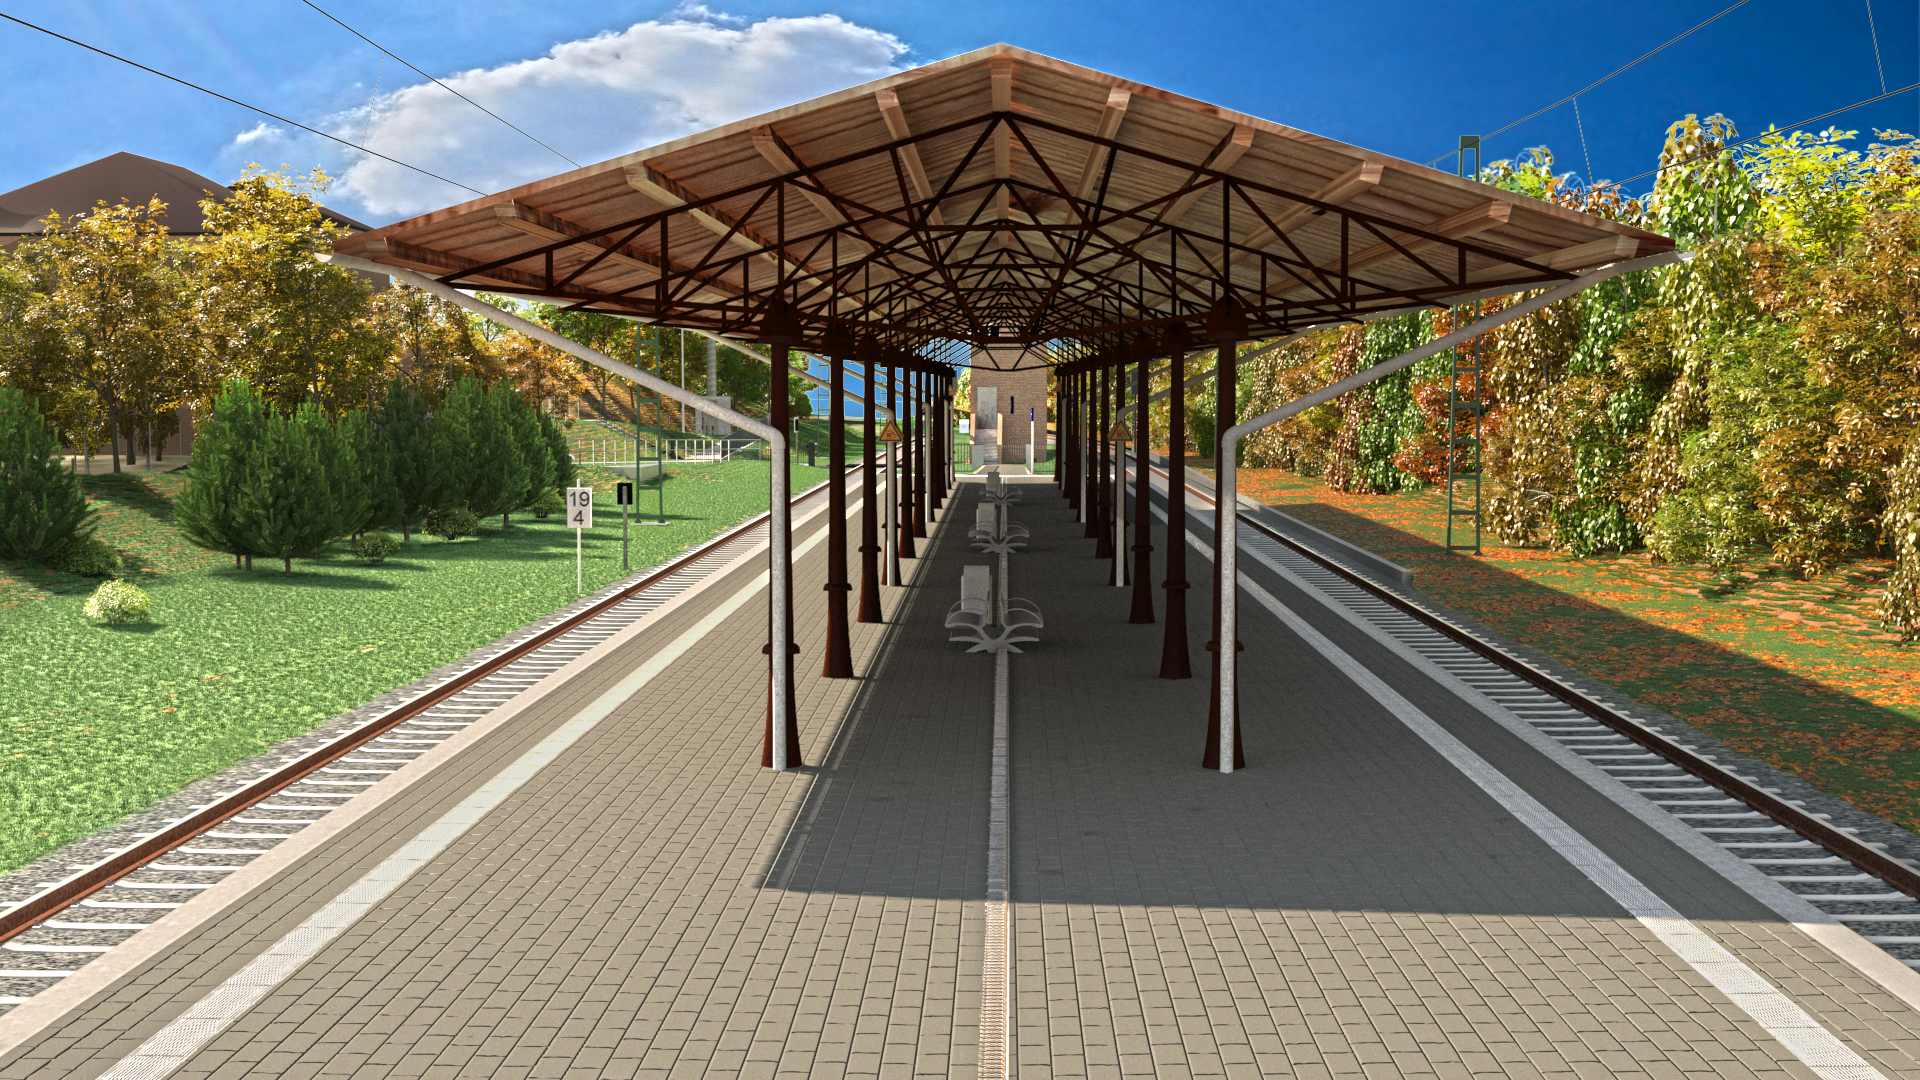 Rail upgrade - Modernization of the platform roof at Schönberg station in a steel truss construction from 1936 in accordance with the preservation order (simulation)